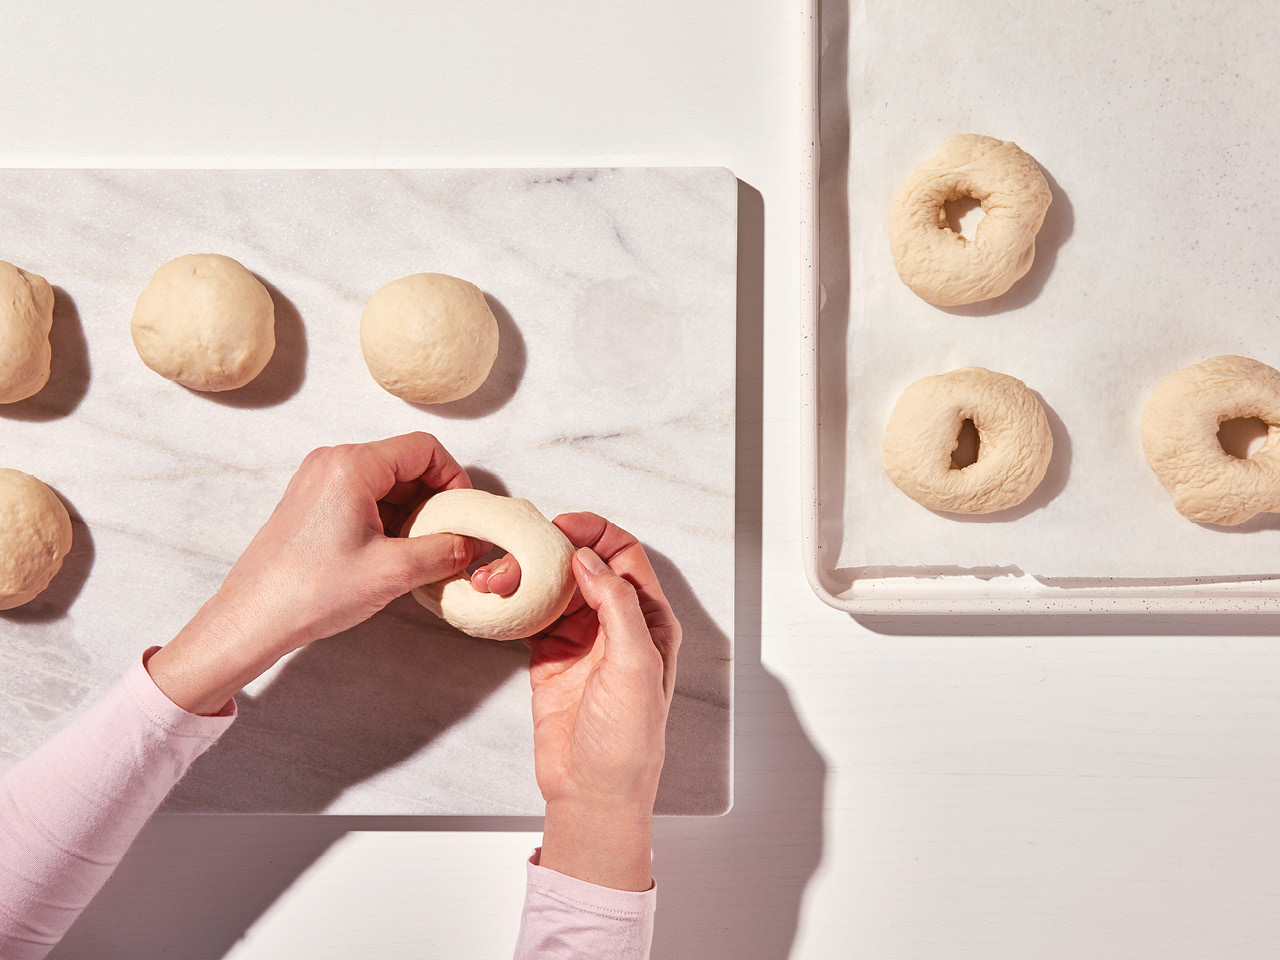 A photo of a person's hands poking a hole into a ball of dough to make homemade bagels.